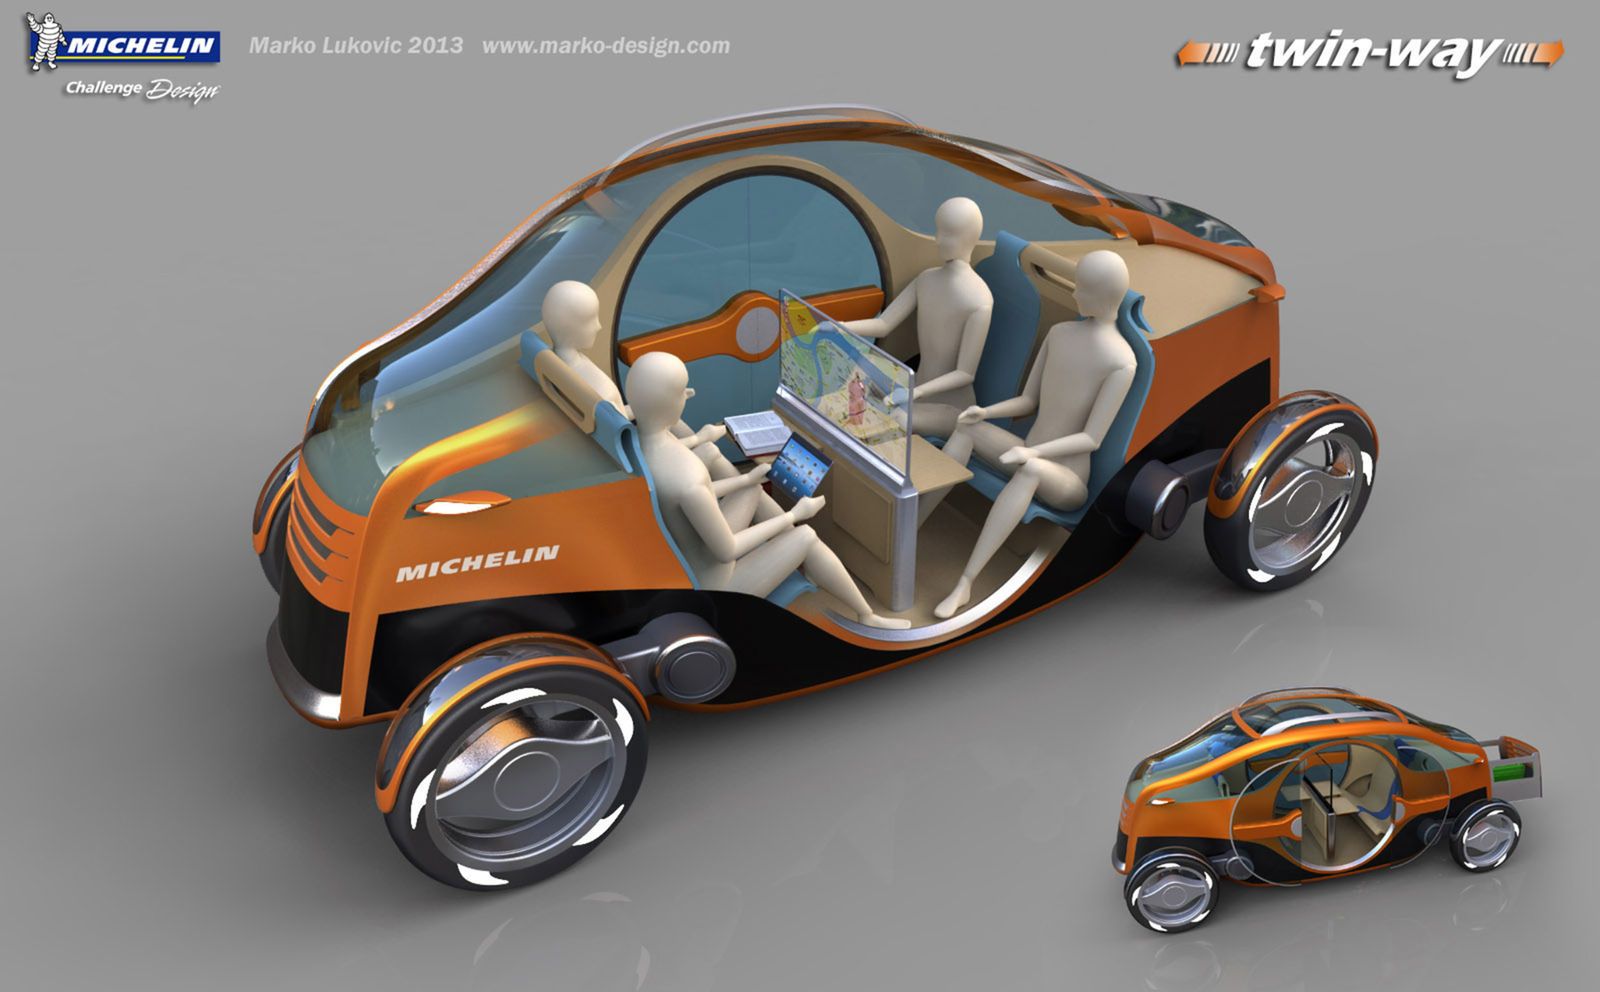 Amazing futuristic car designs from racing cars to rescue vehicles image 25